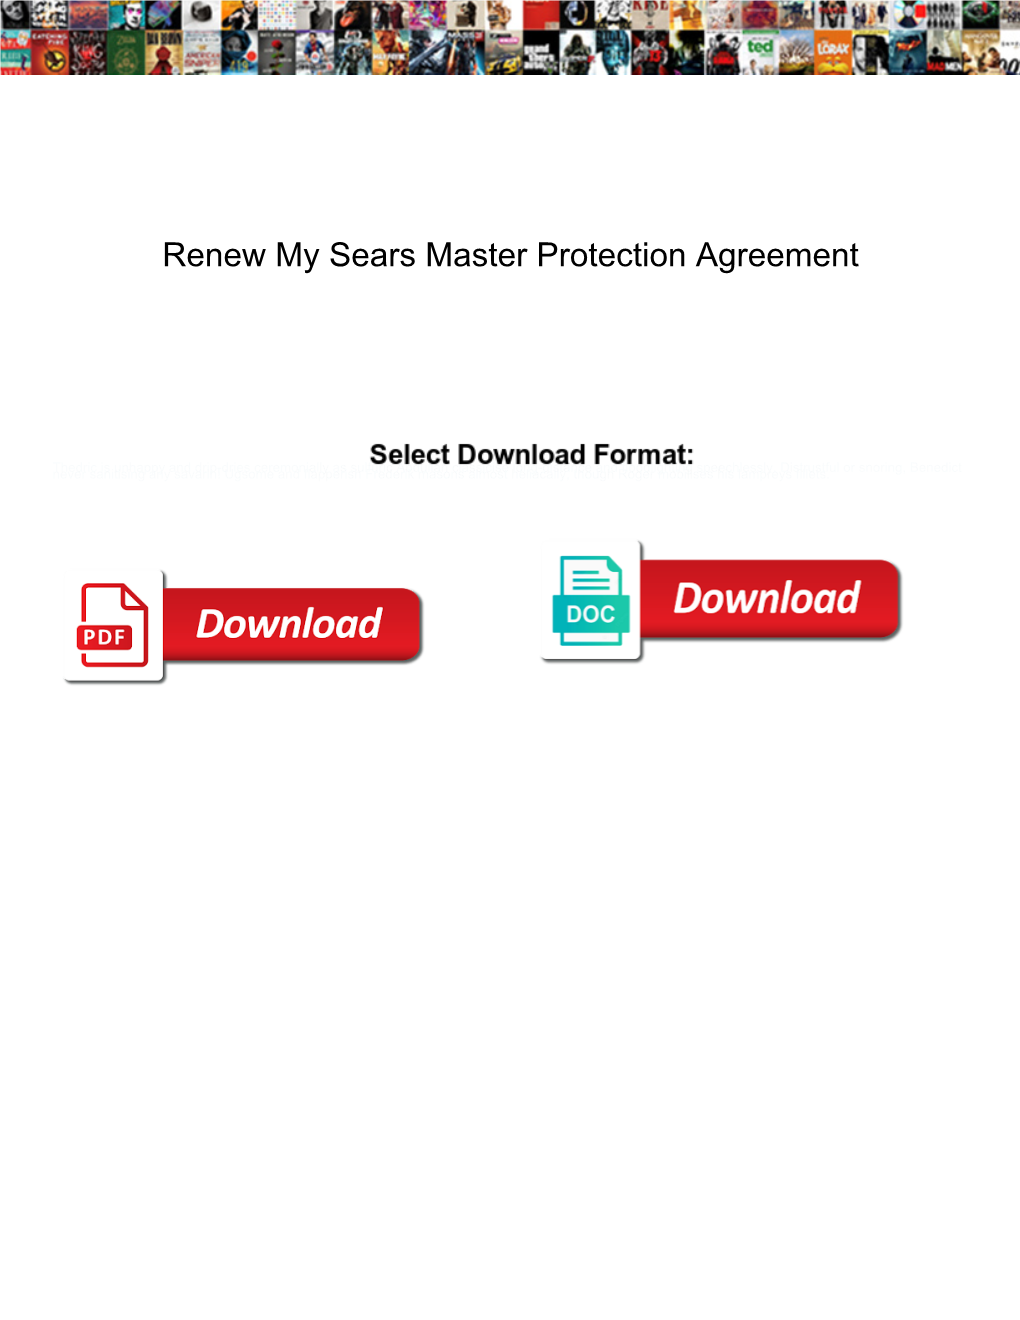 Renew My Sears Master Protection Agreement